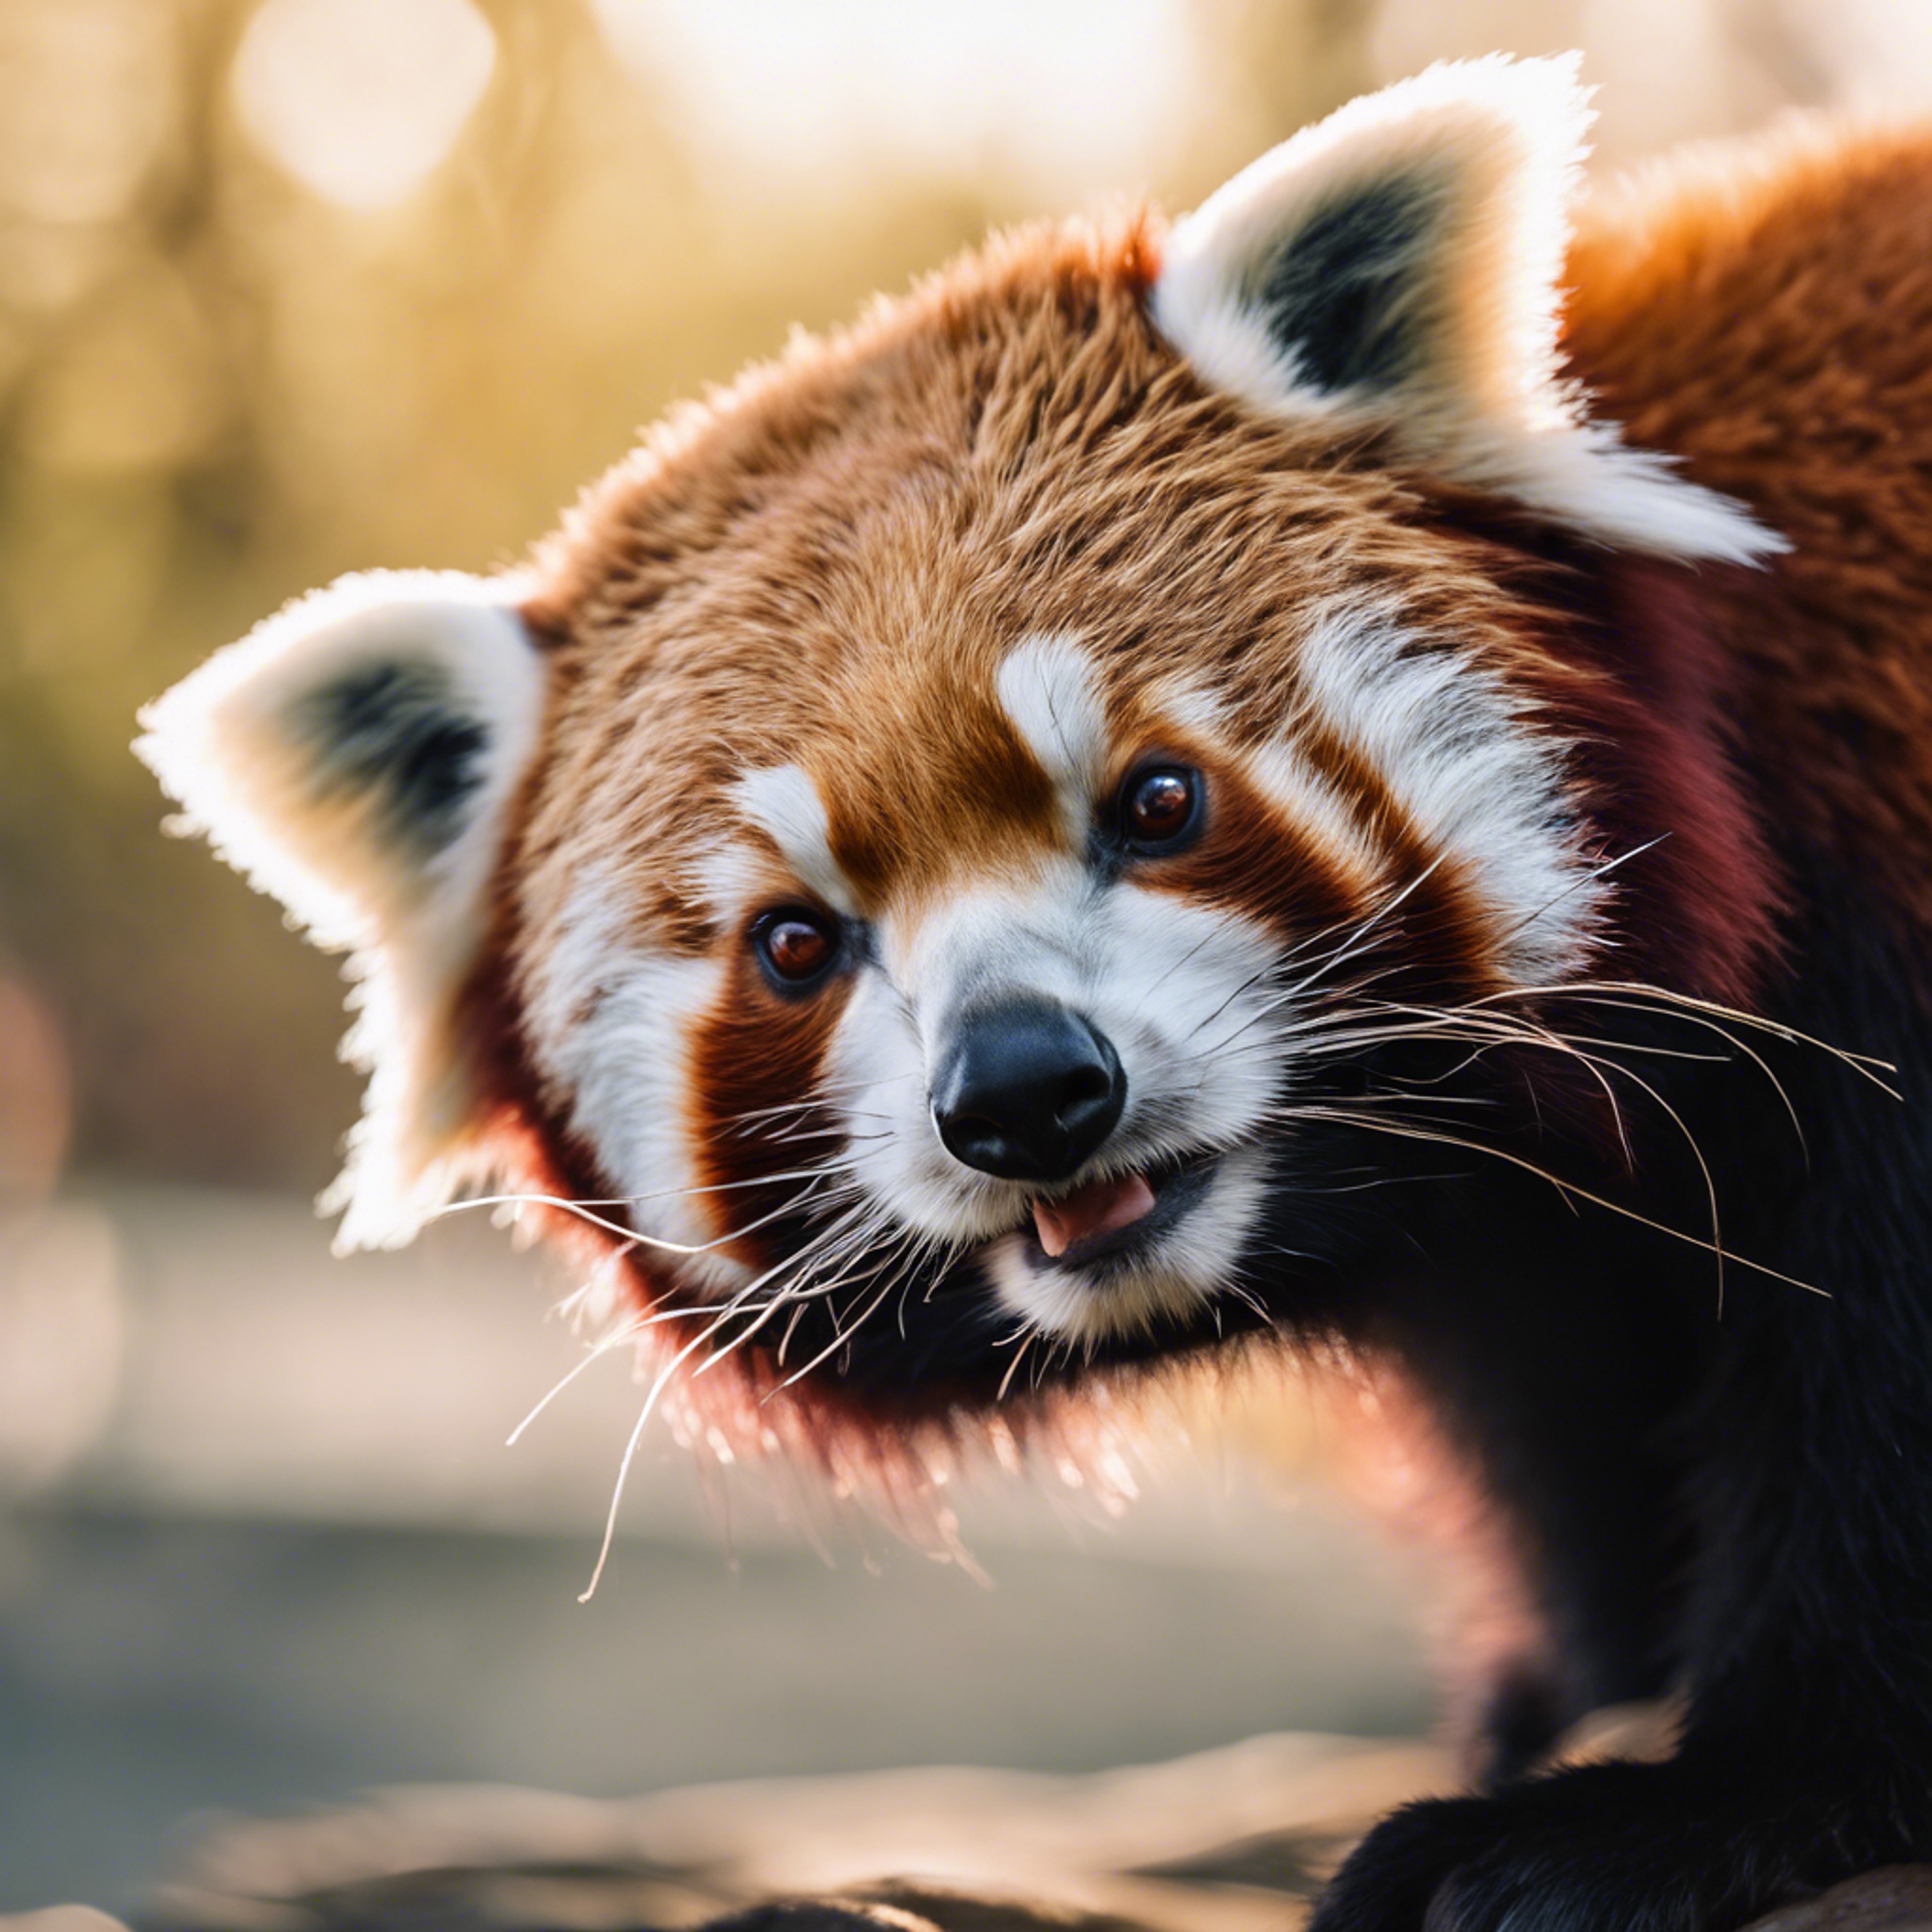 A grumpy looking red panda squinting against the morning sun.壁紙[9902a2e1279e43e38f8b]